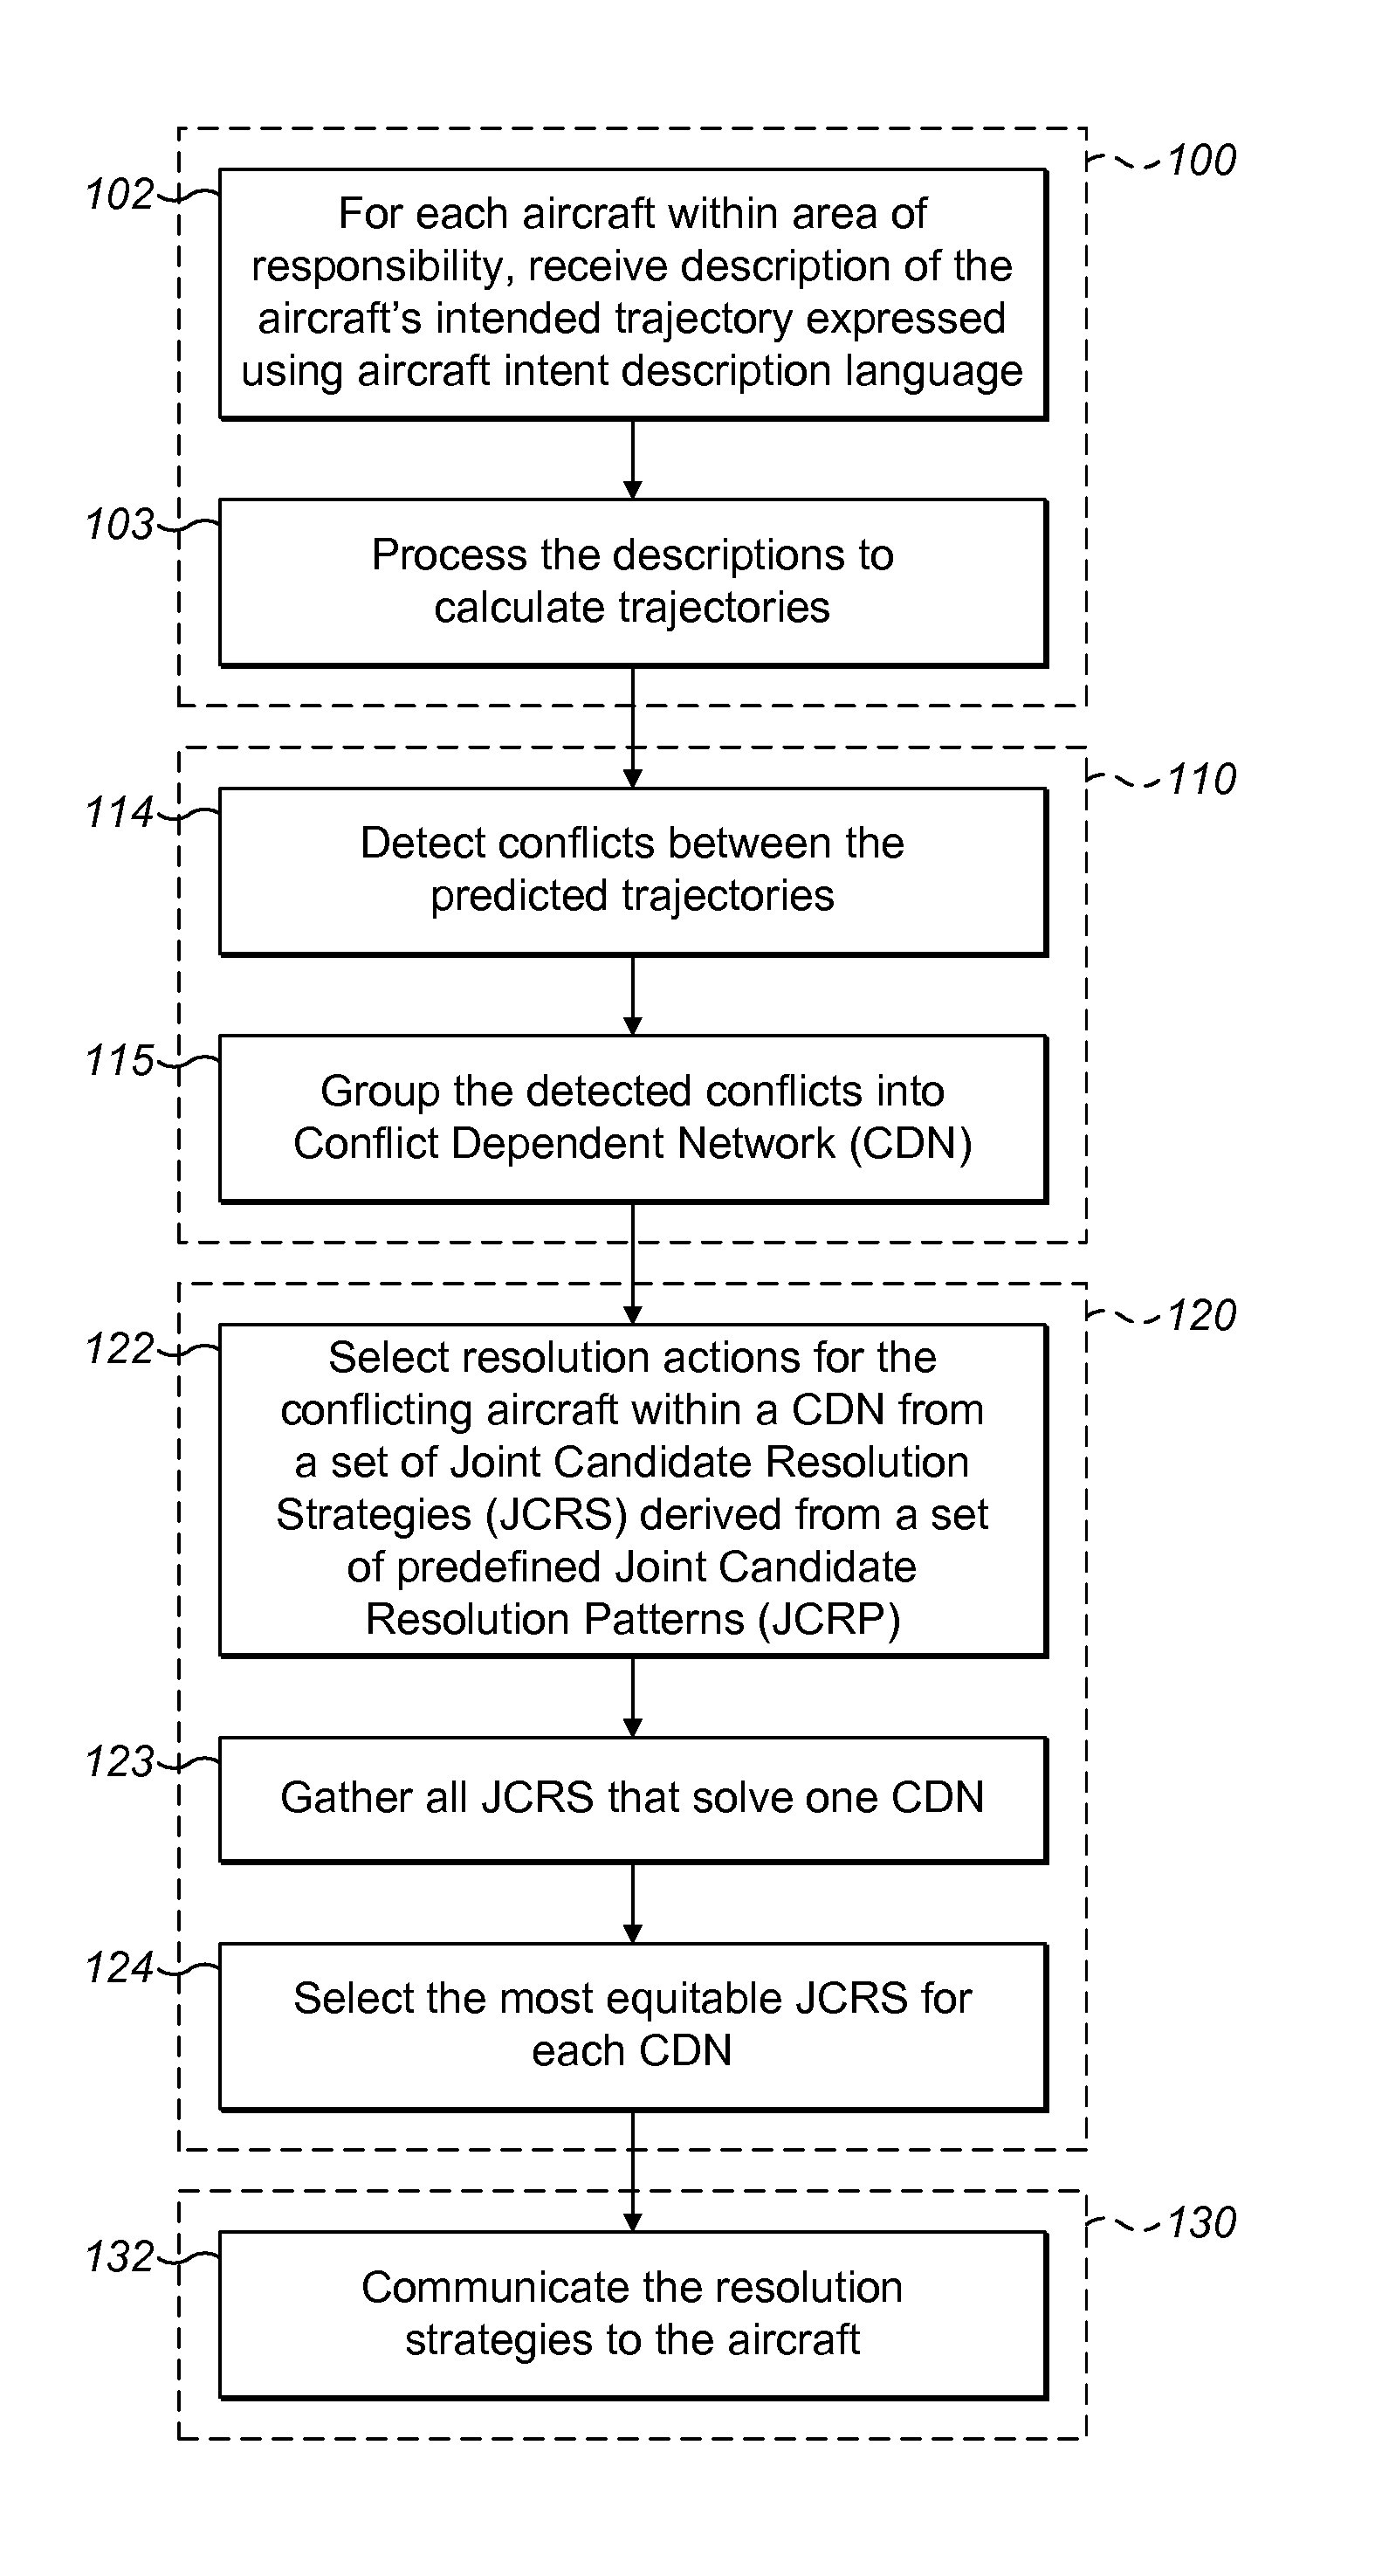 Conflict detection and resolution using predicted aircraft trajectories